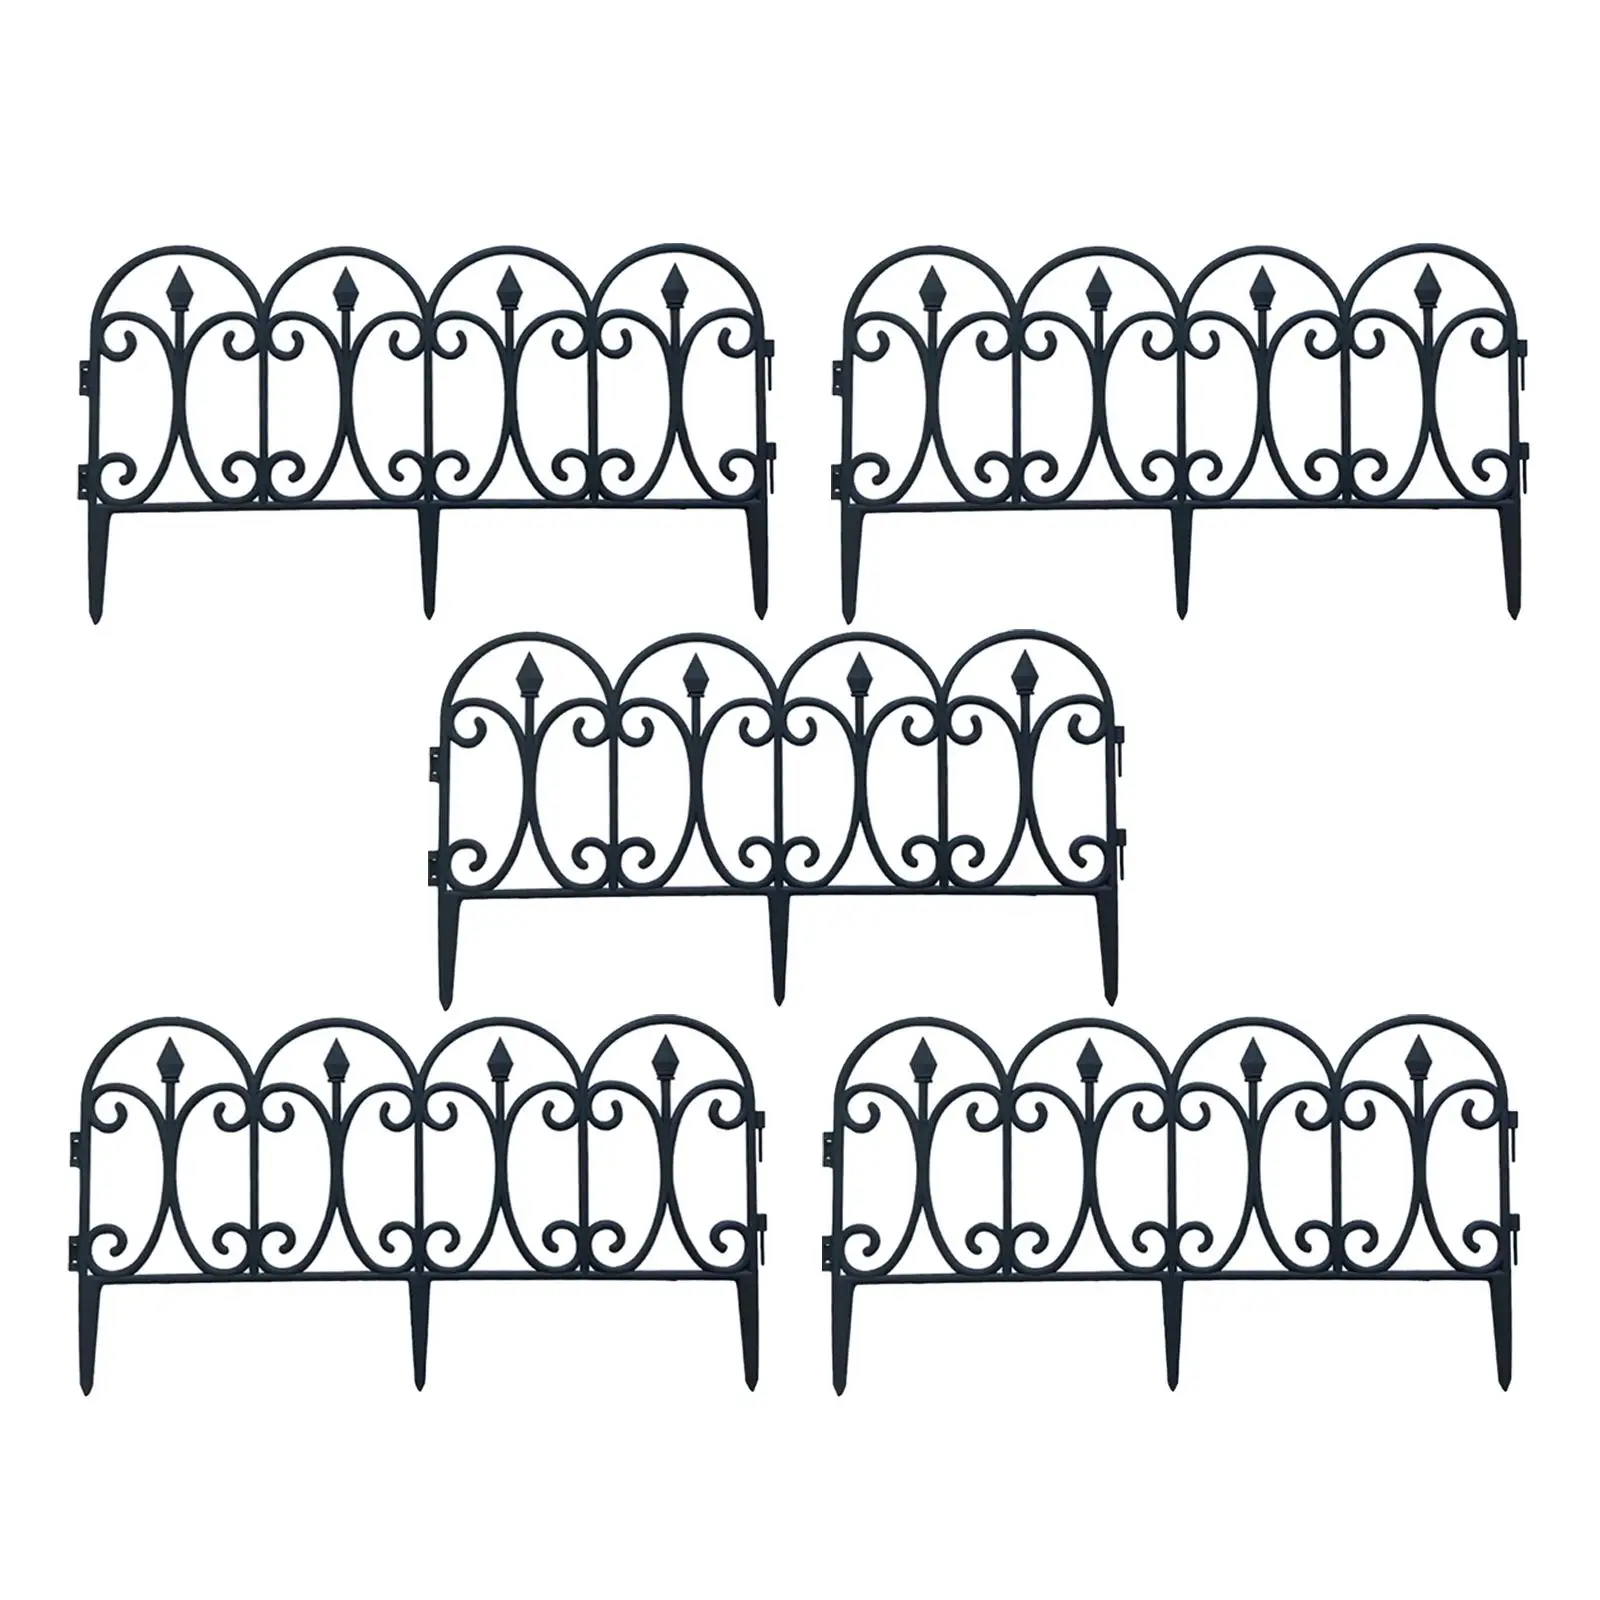 5x Artificial Garden Fence Ground Insert Border Decoration Fencing for Landscaping Lawn Flower Bed Edging Yard DIY Decorative